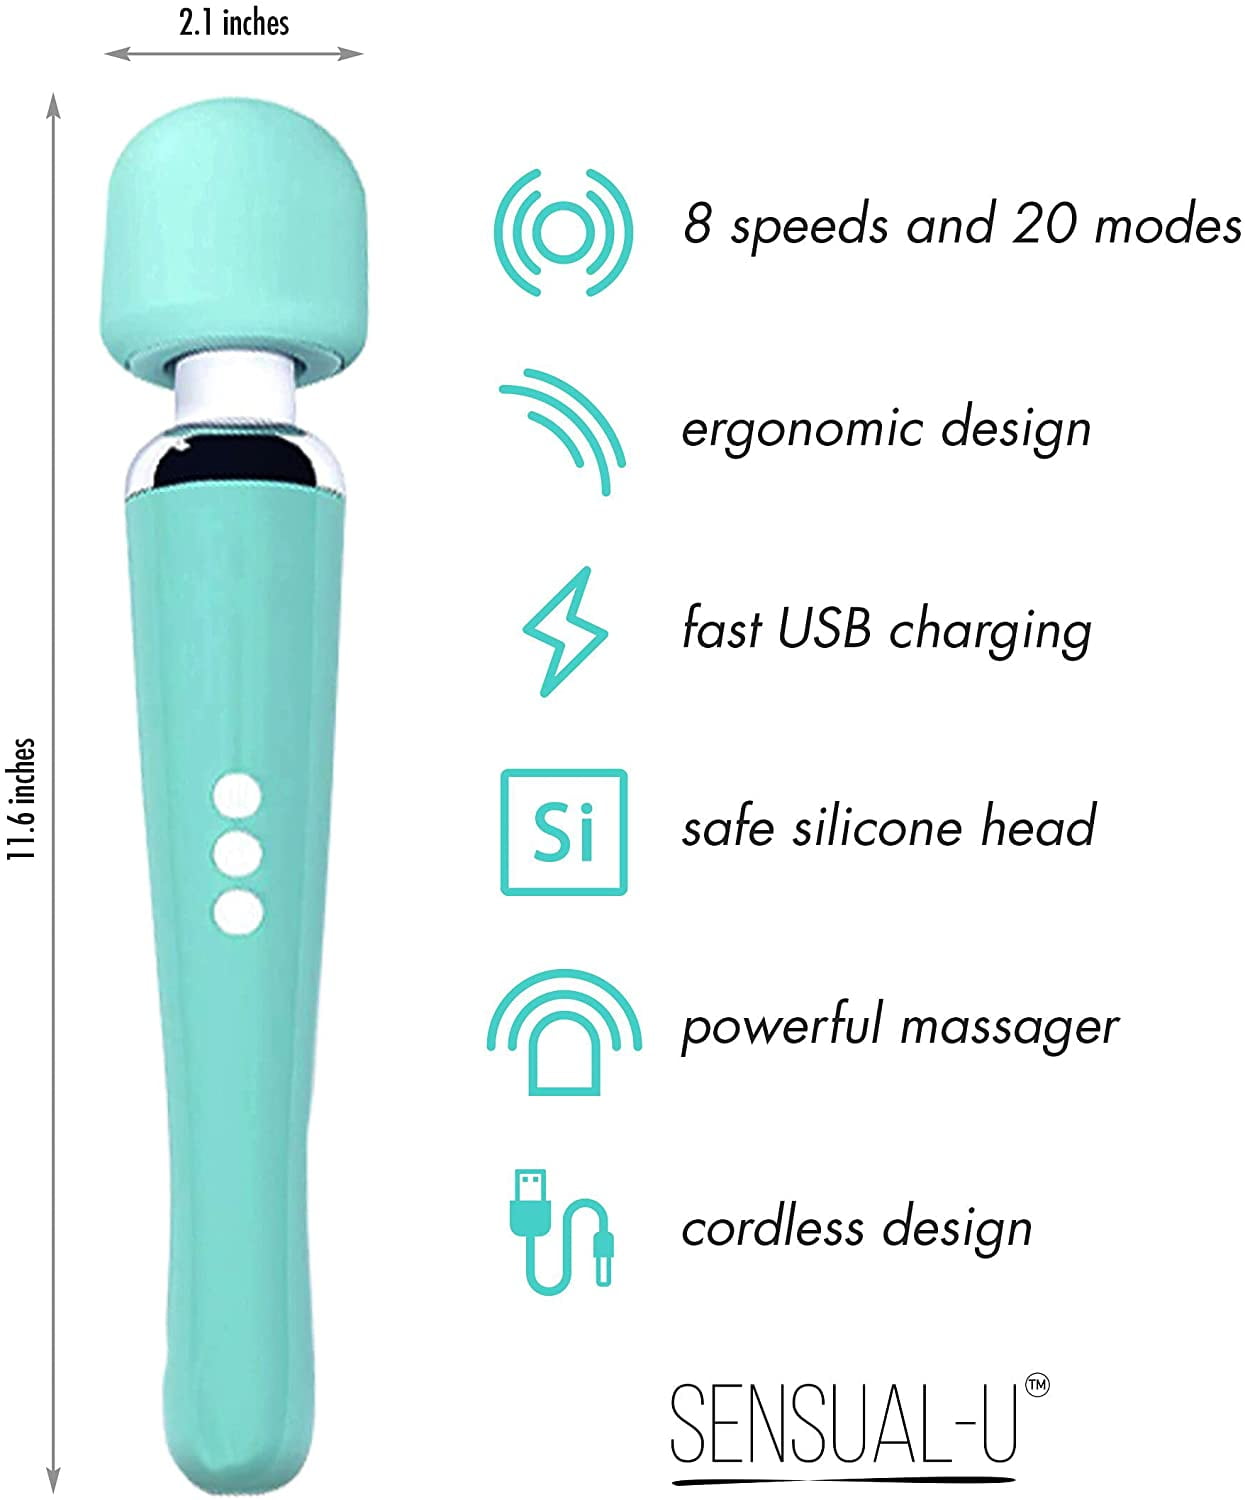 Therapeutic Personal Massager - Handheld Cordless, Powerful - 8